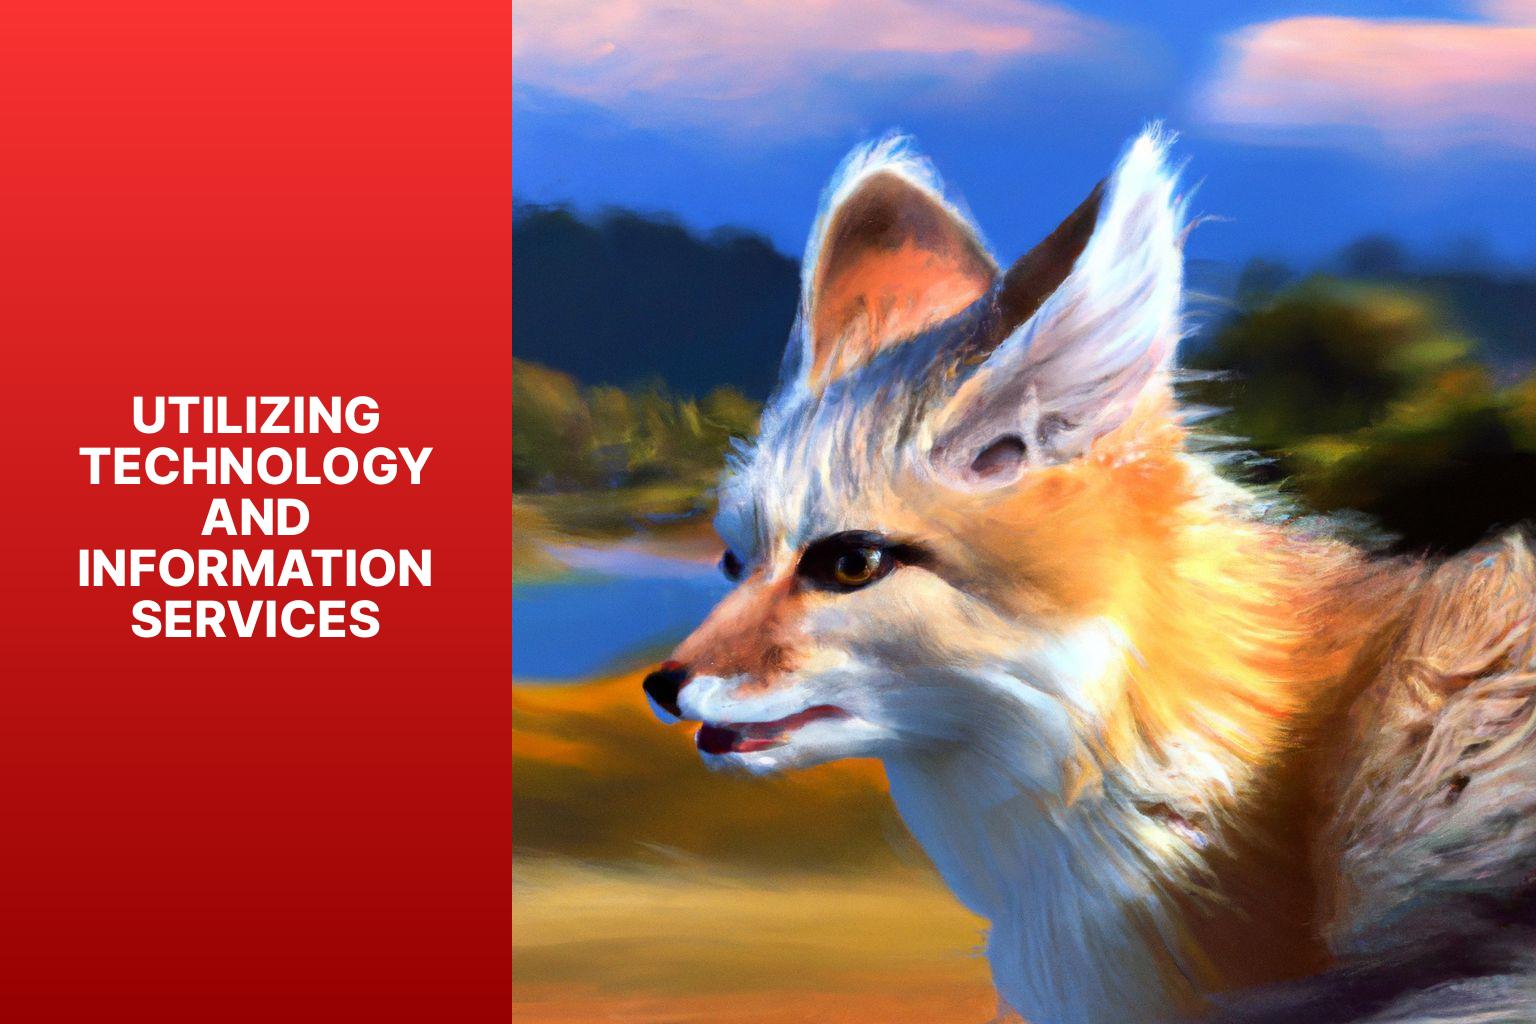 Utilizing Technology and Information Services - Swift Fox Taxonomy 